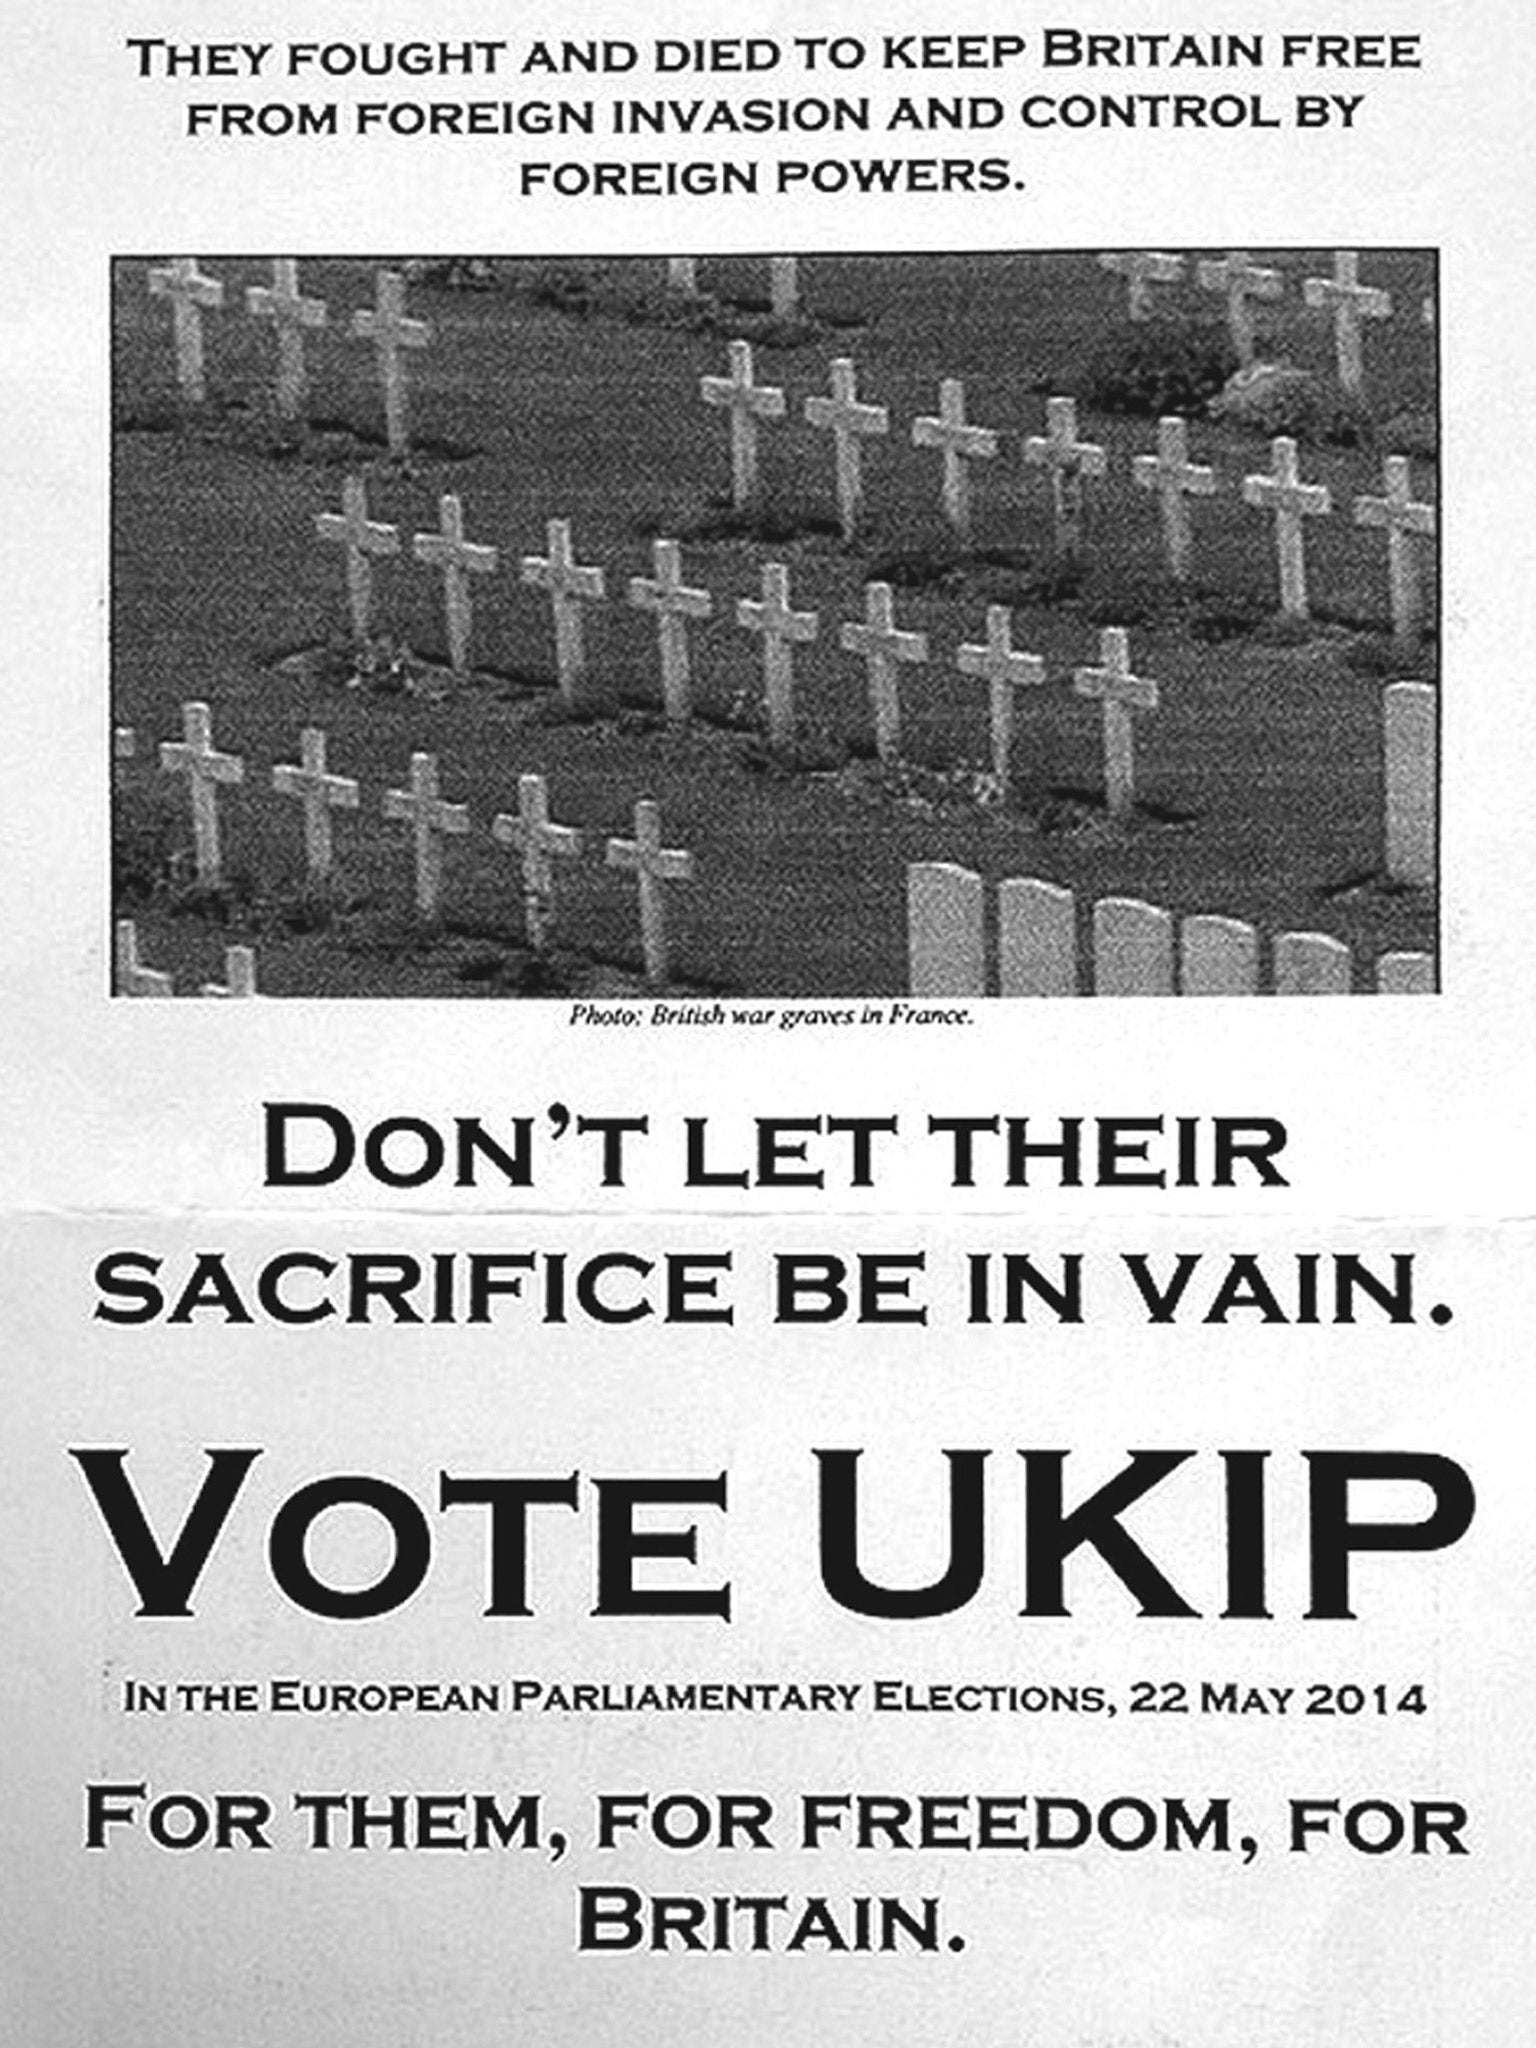 Crossed wired: Ukip’s reference to the sacrifice made by British soldiers in the Great War has backfired